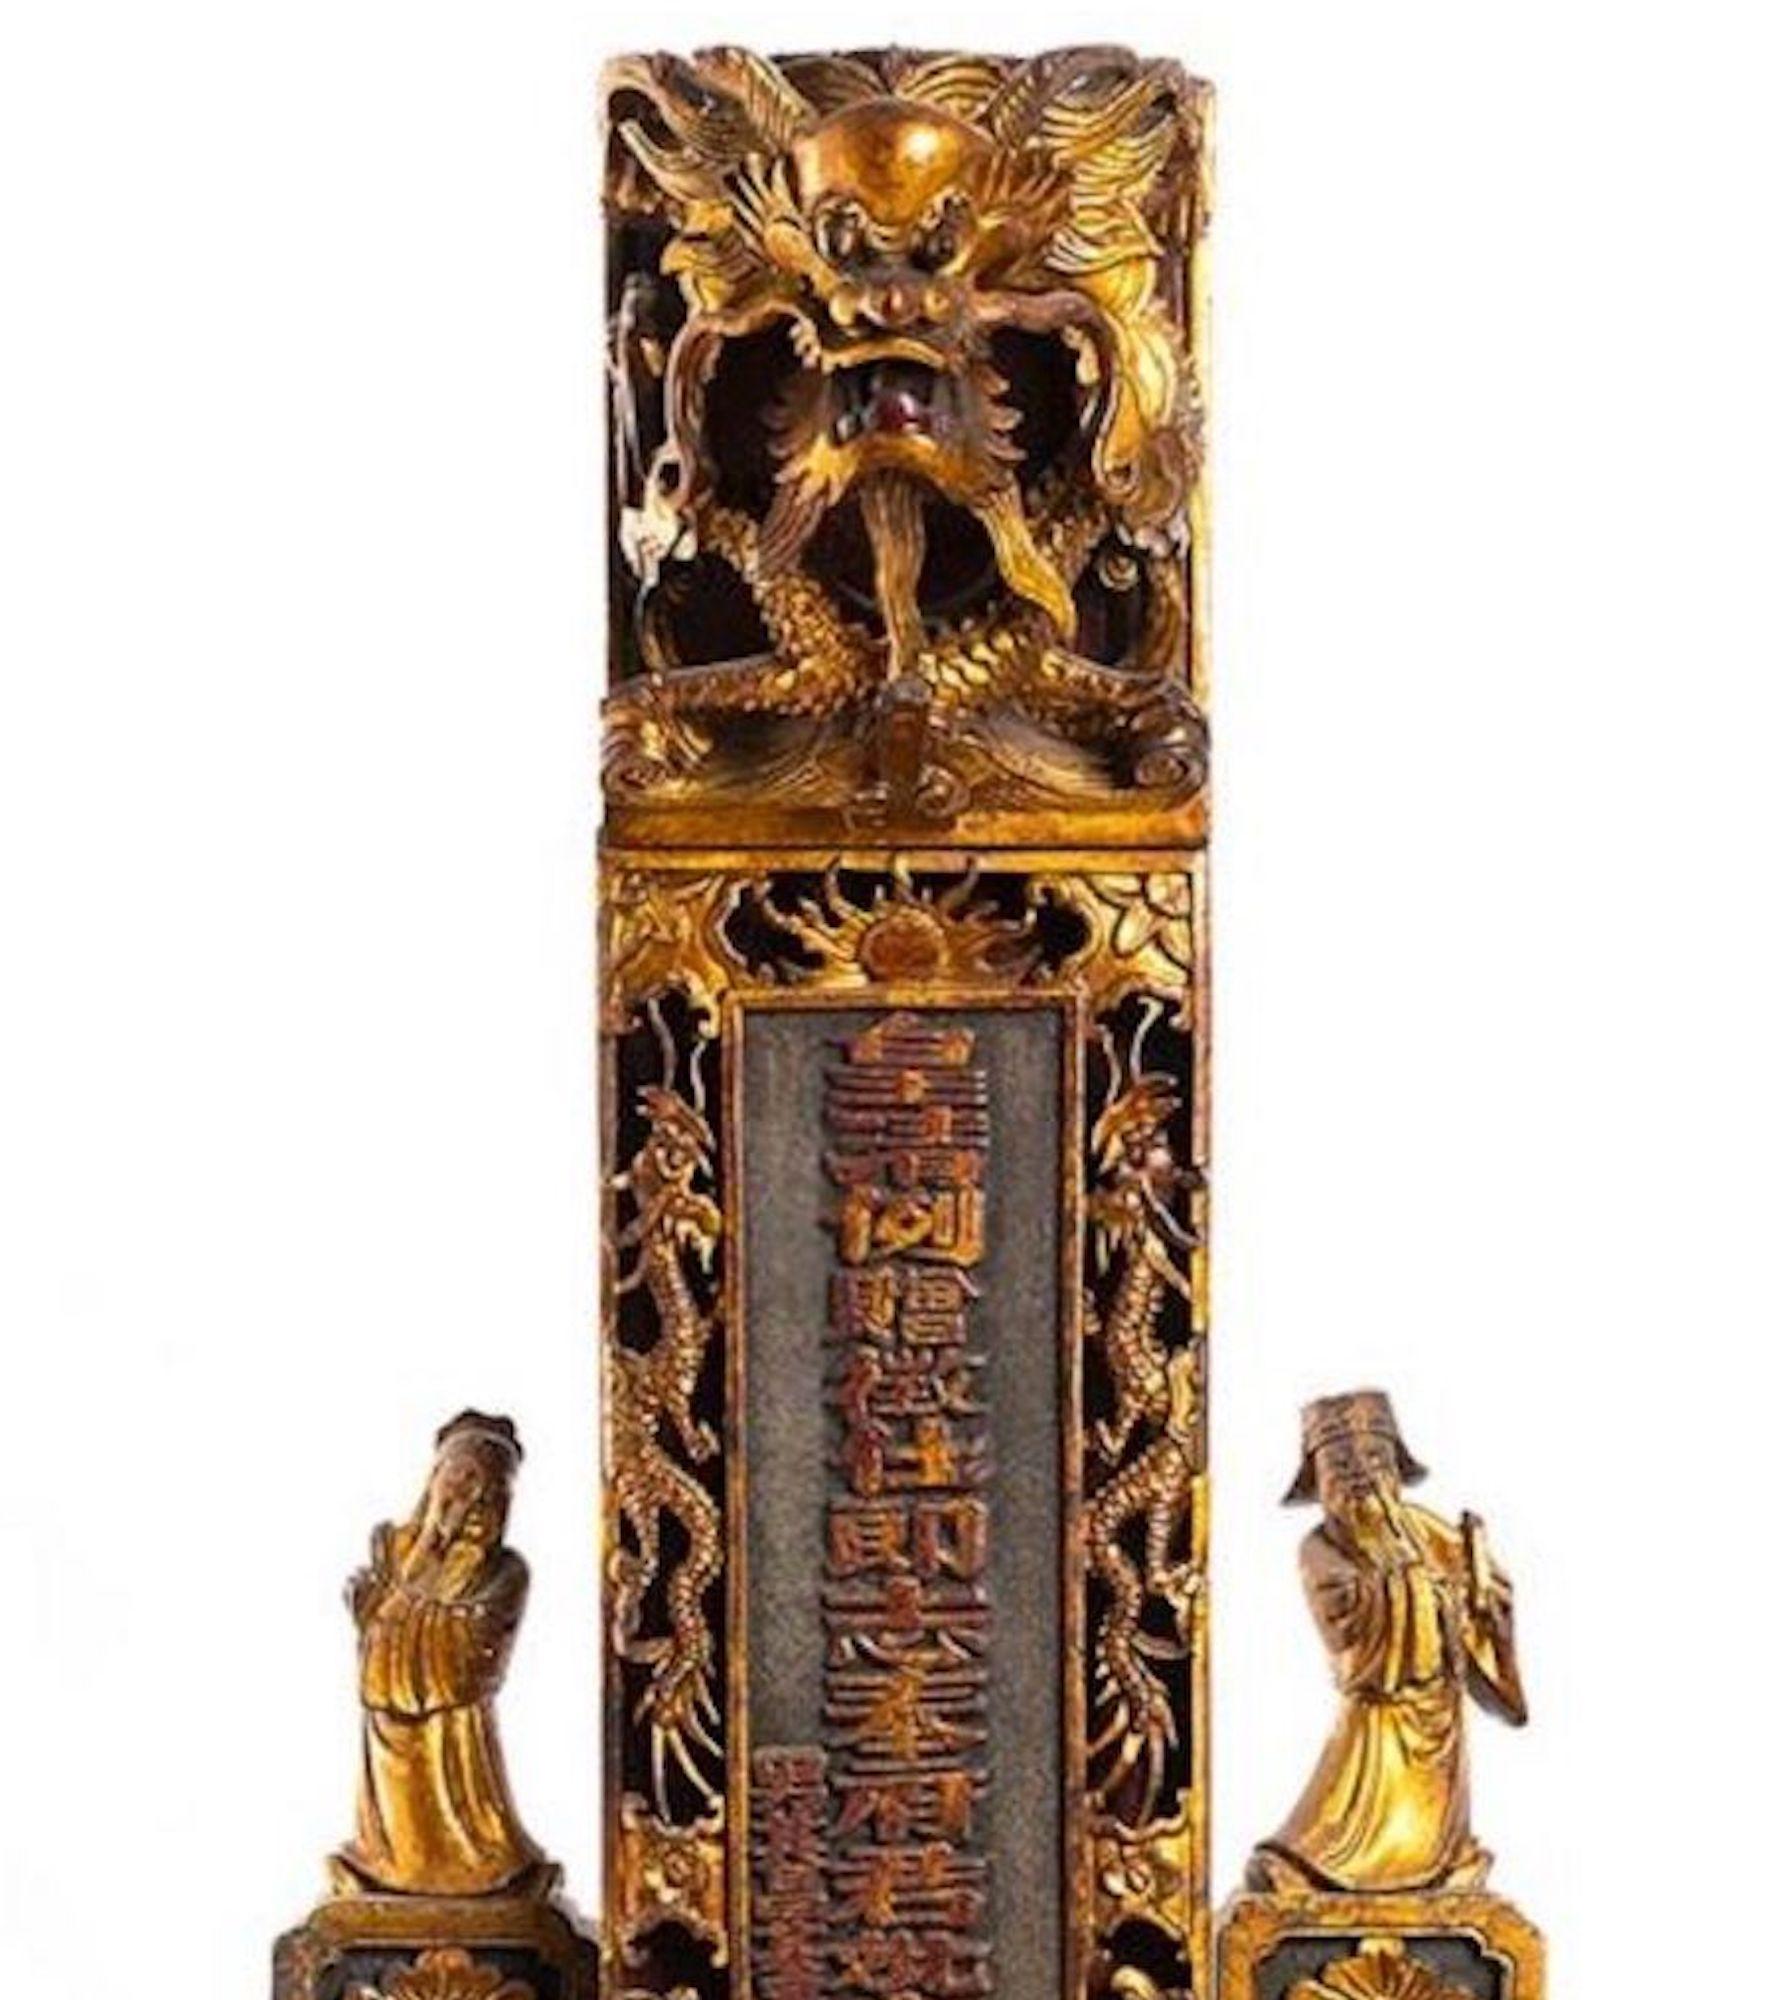 Wooden Stelae is an original work realized in China between the end of the 19th century and the beginning of the 20th century. 

Wood and gold. 

Provenance: Italian Private Collection. 

Mint condition. 

Very beautiful religious Oriental